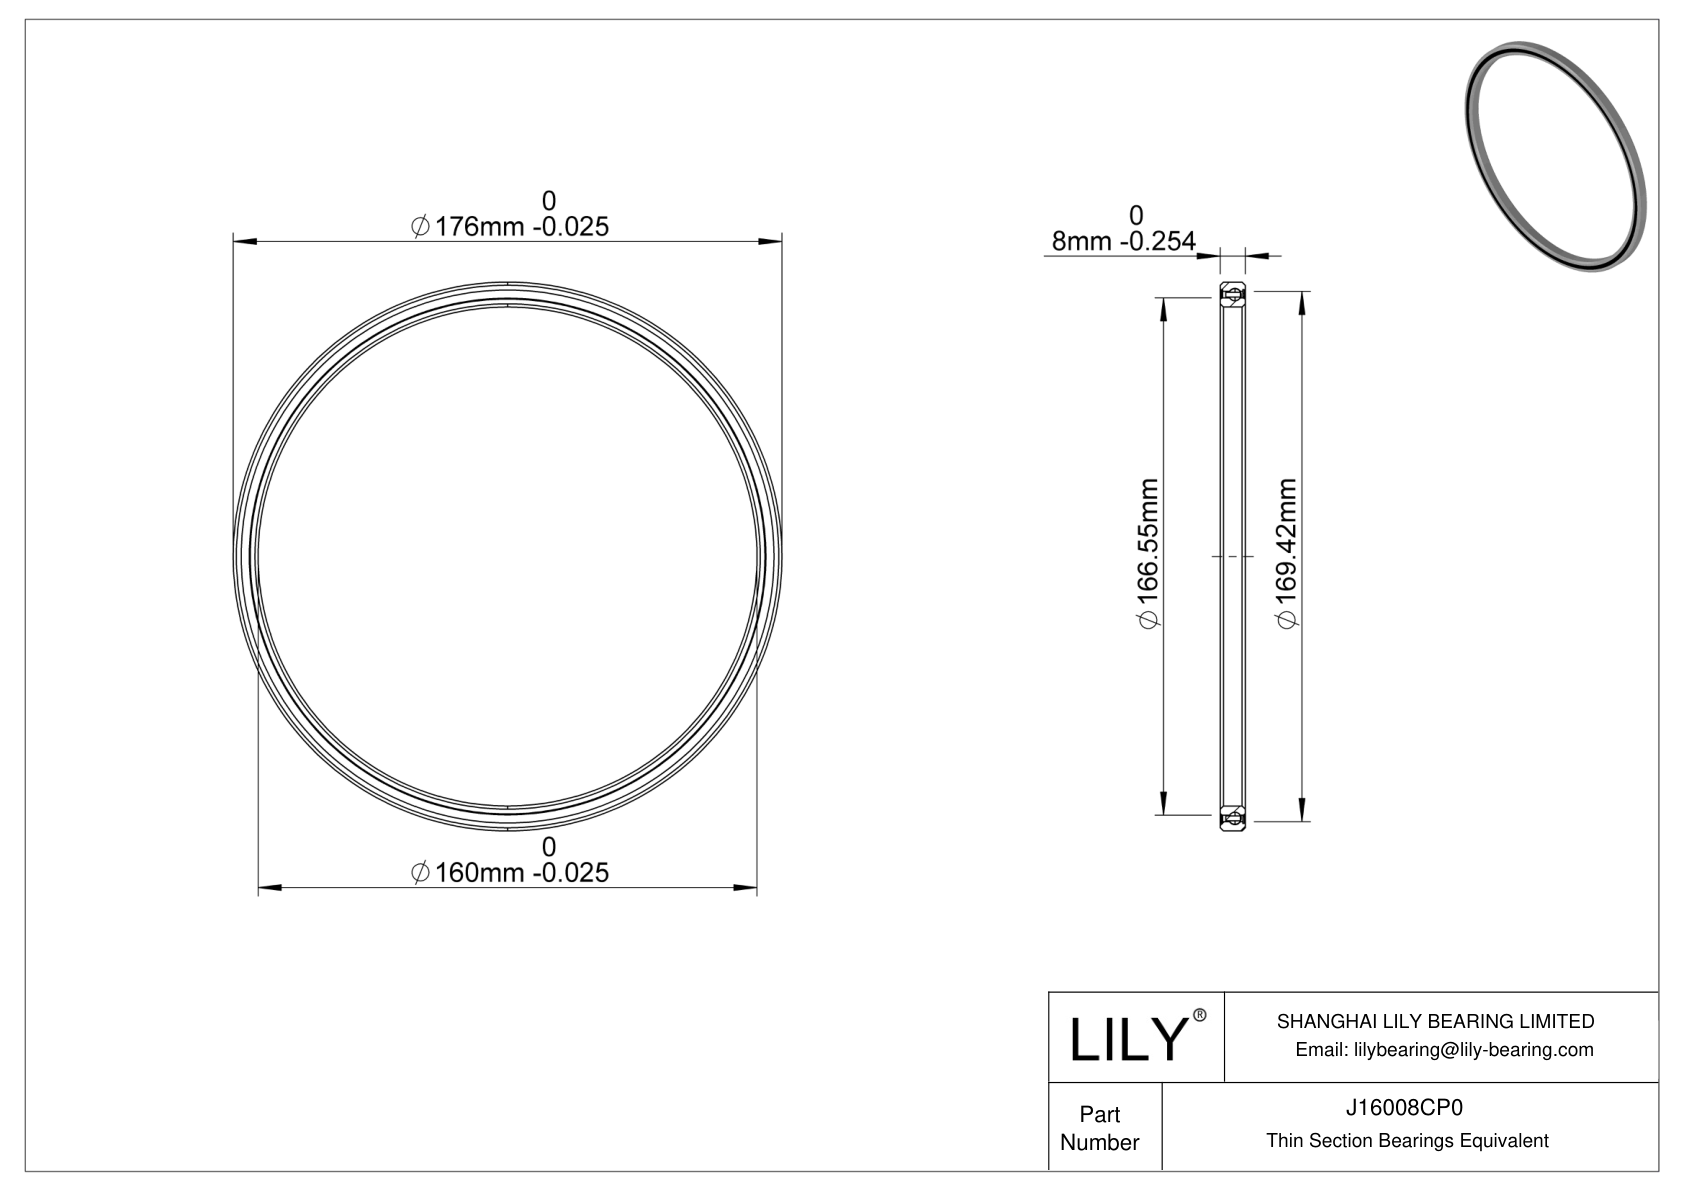 J16008CP0 Constant Section (CS) Bearings cad drawing